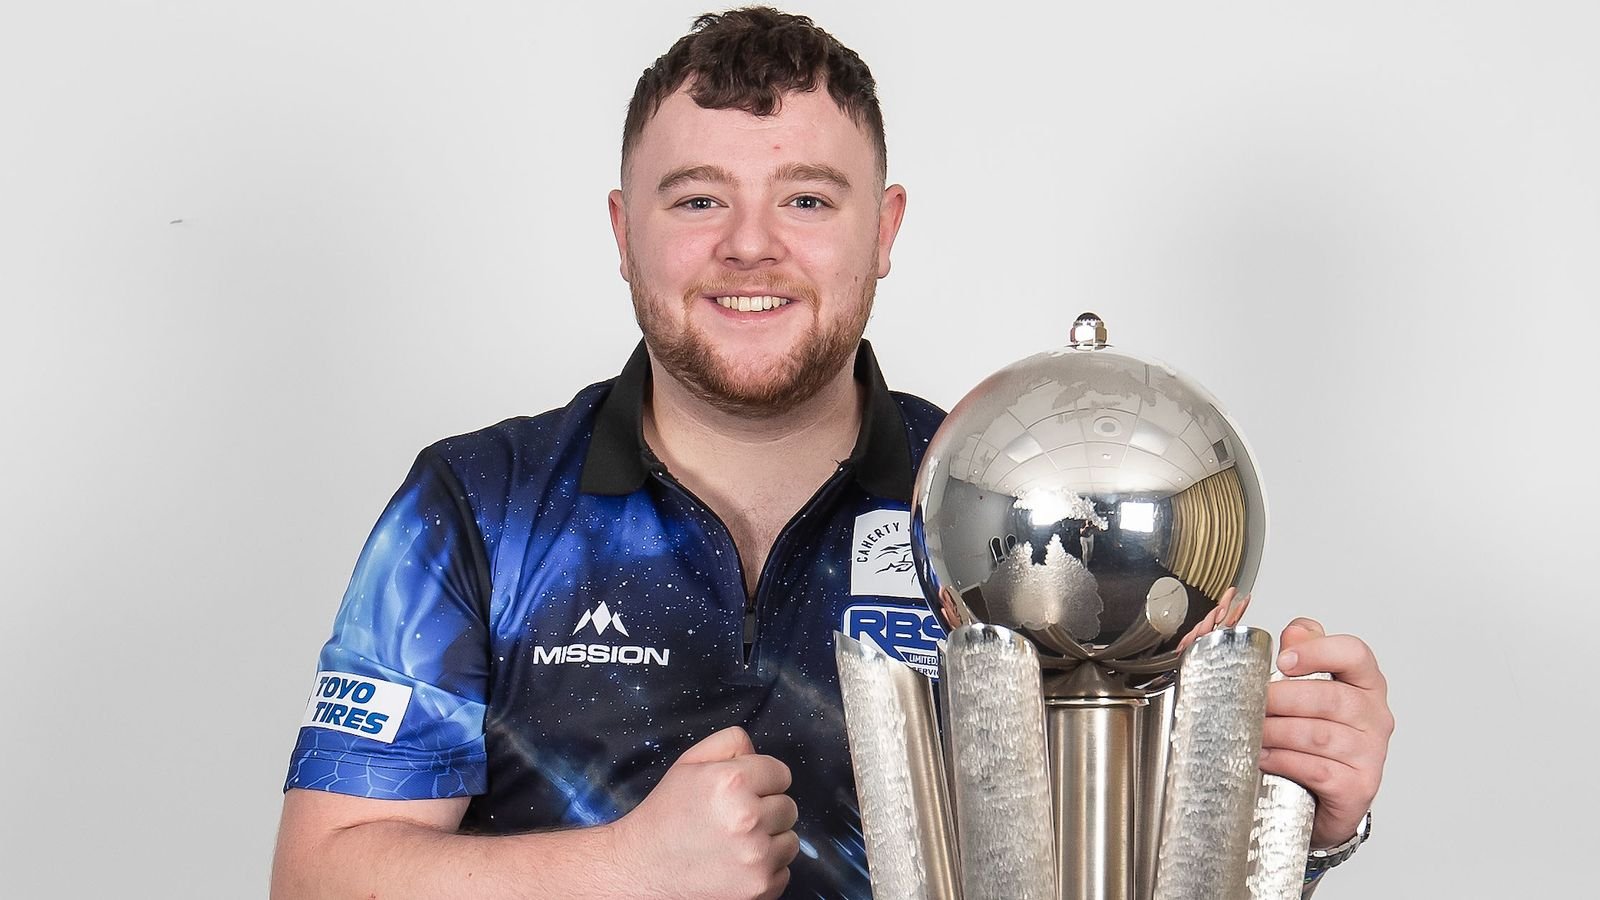 Josh Rock vows that there is more to come from him and says experience will make him better | Darts News